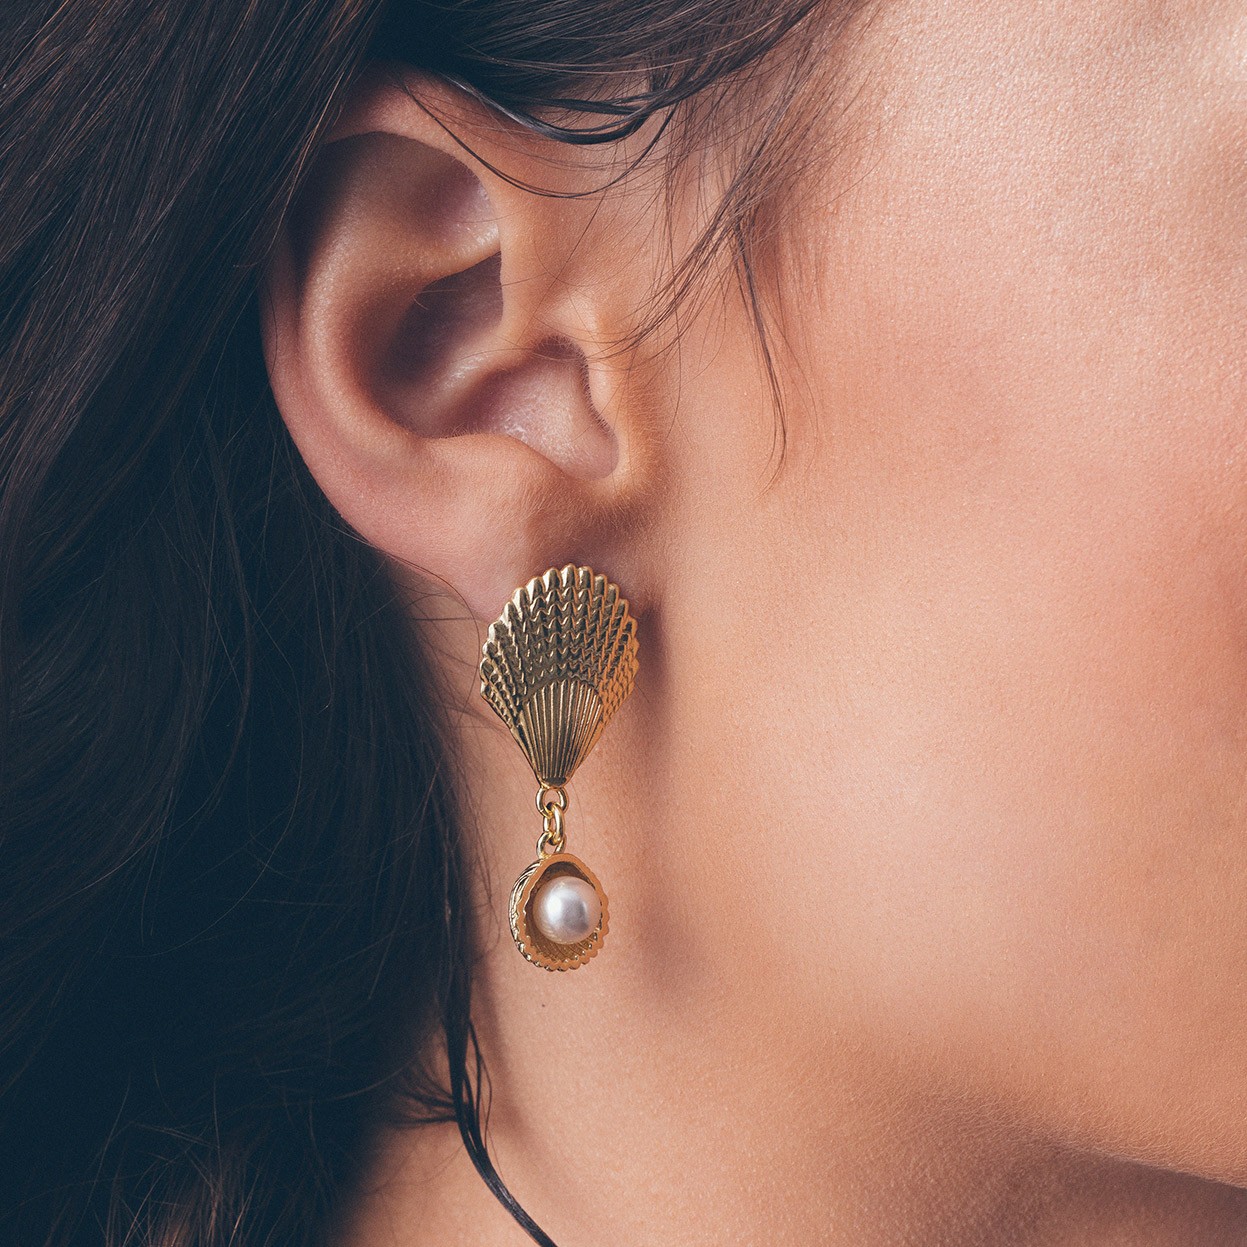 Earring - shells with pearl, T°ra'vel'' sterling silver 925